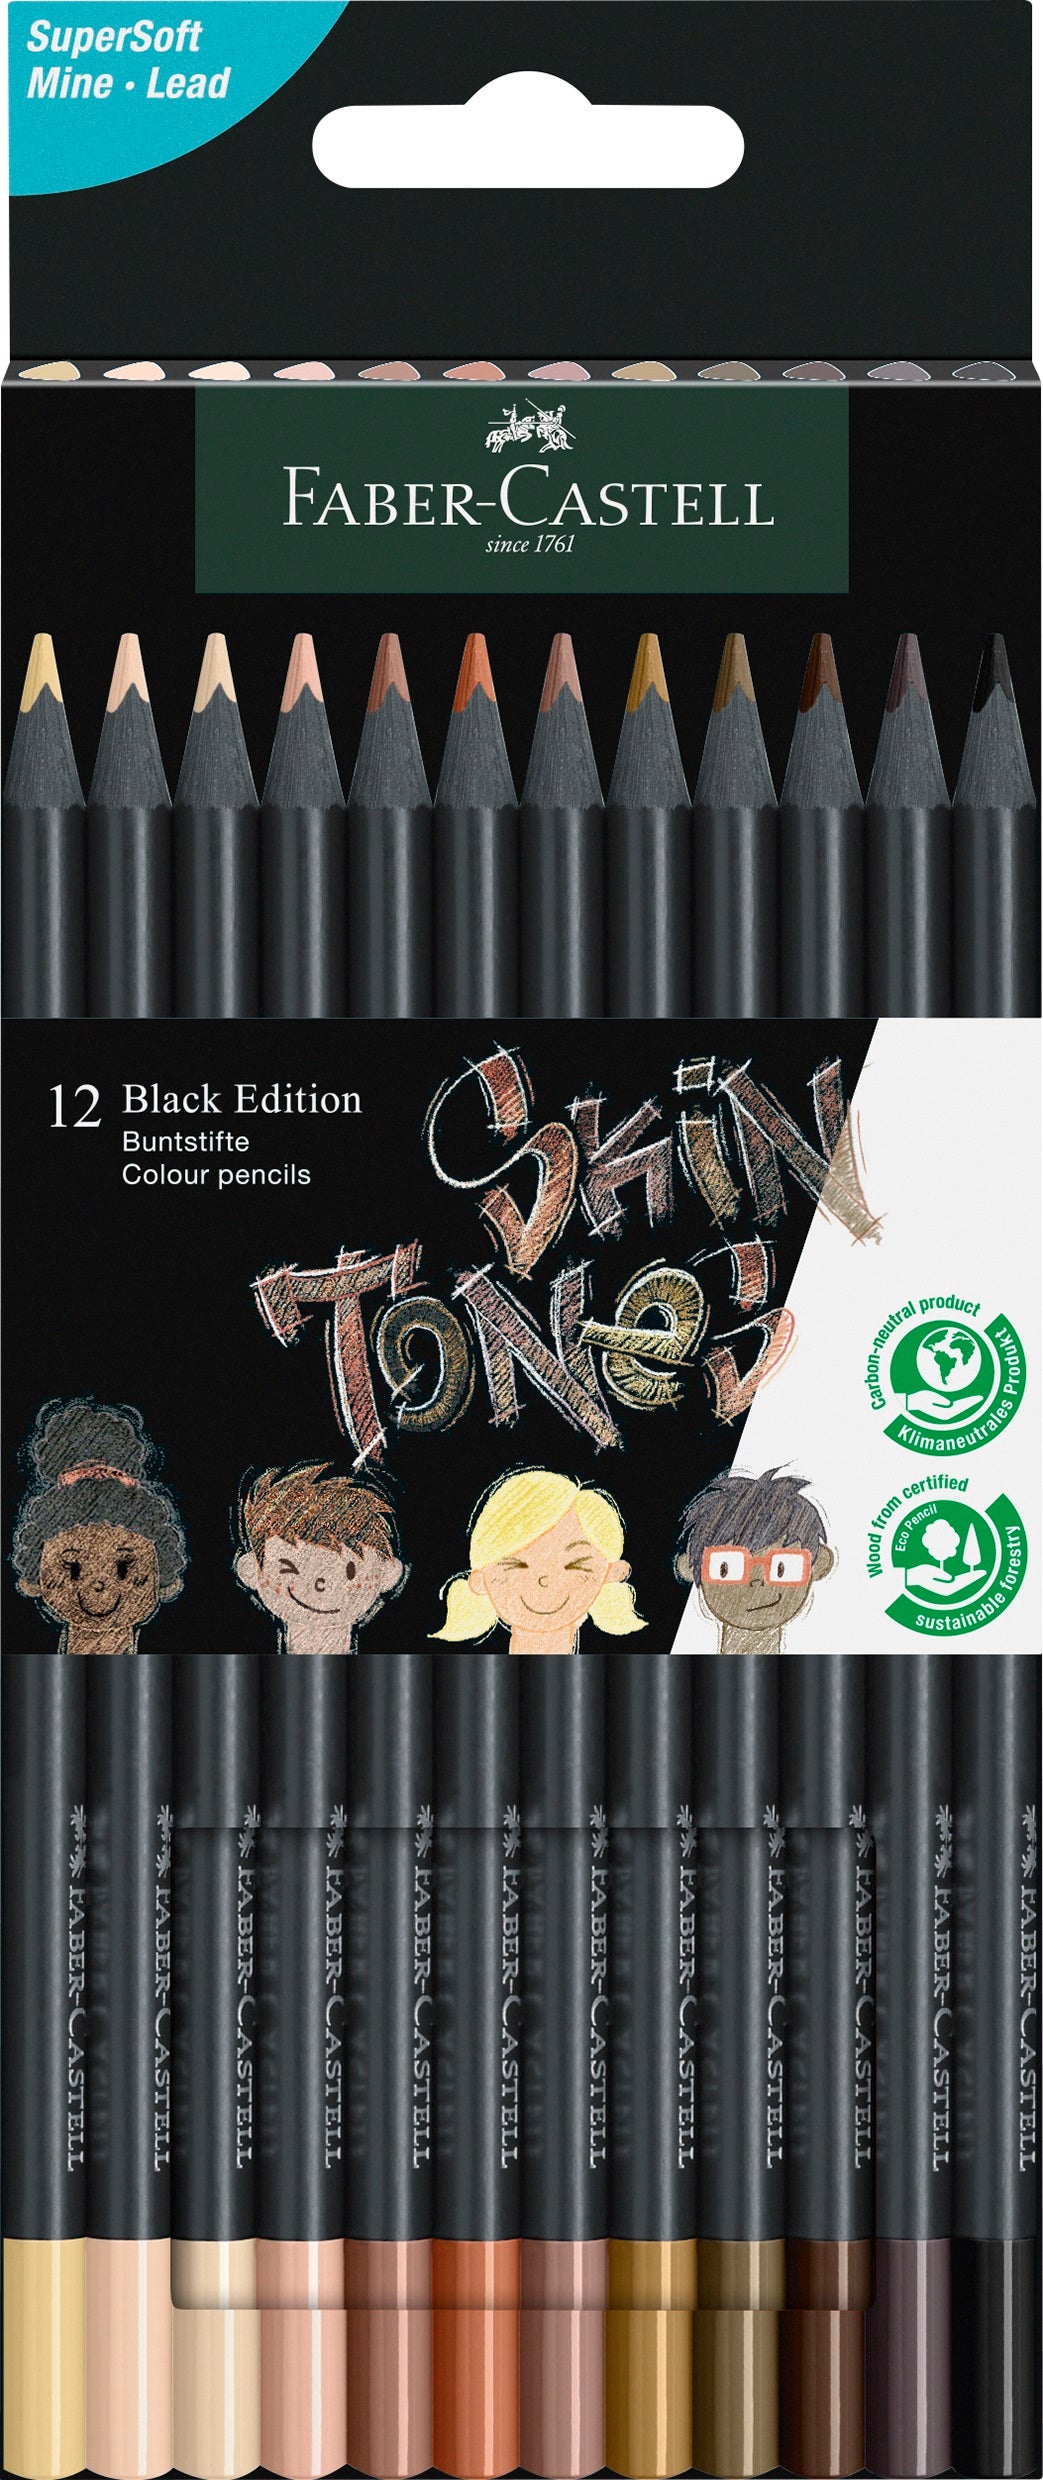 Retail packaging for a pack of 12 skin tone colour pencils by Faber Castell. The packaging is black with a cut out showing the pencils inside plus an illustration of them in use. 